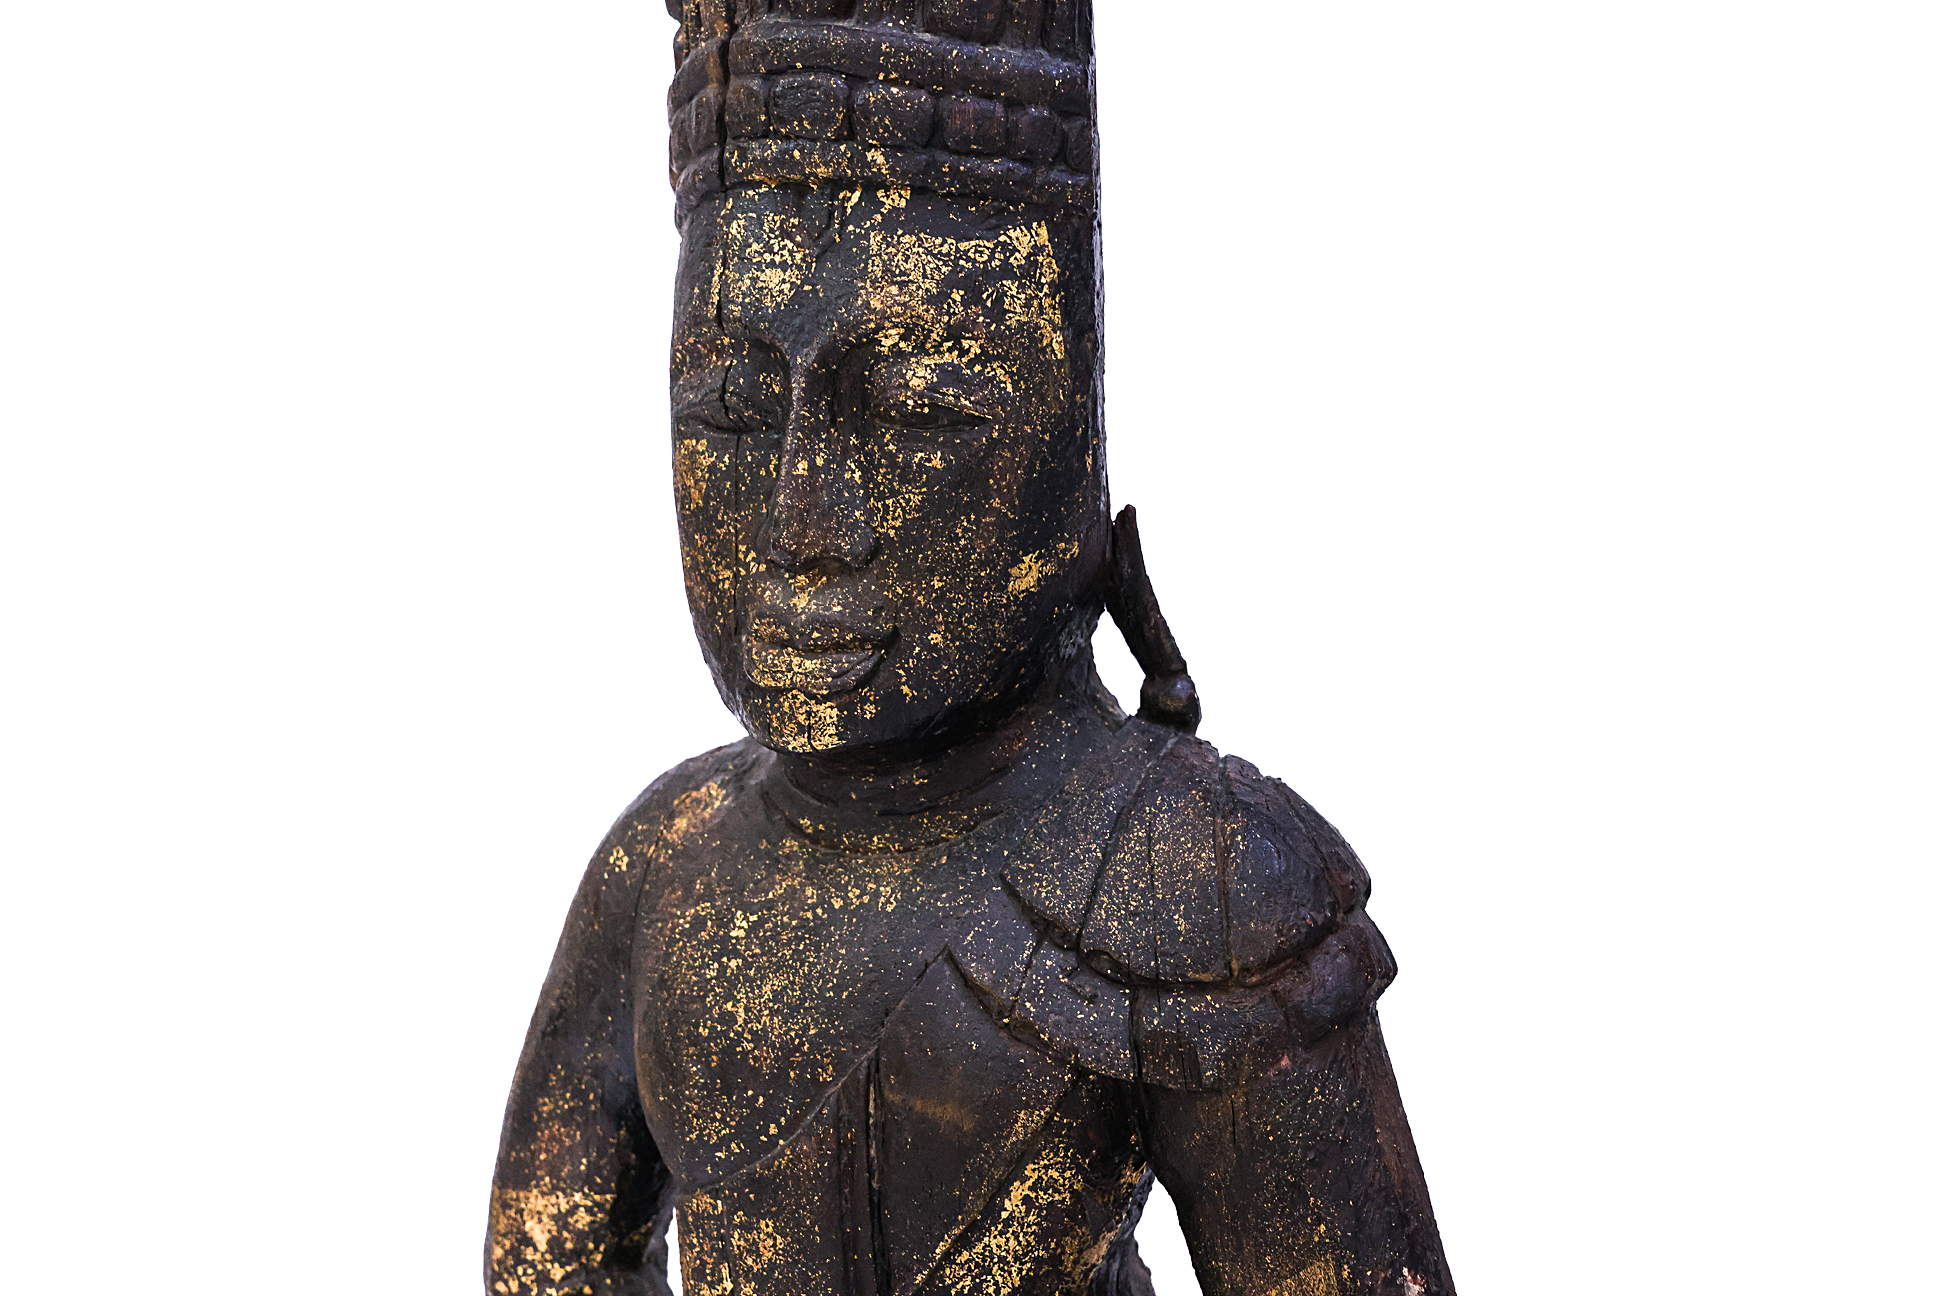 A LARGE BURMESE STATUE OF A CROWNED BUDDHA - Image 2 of 3